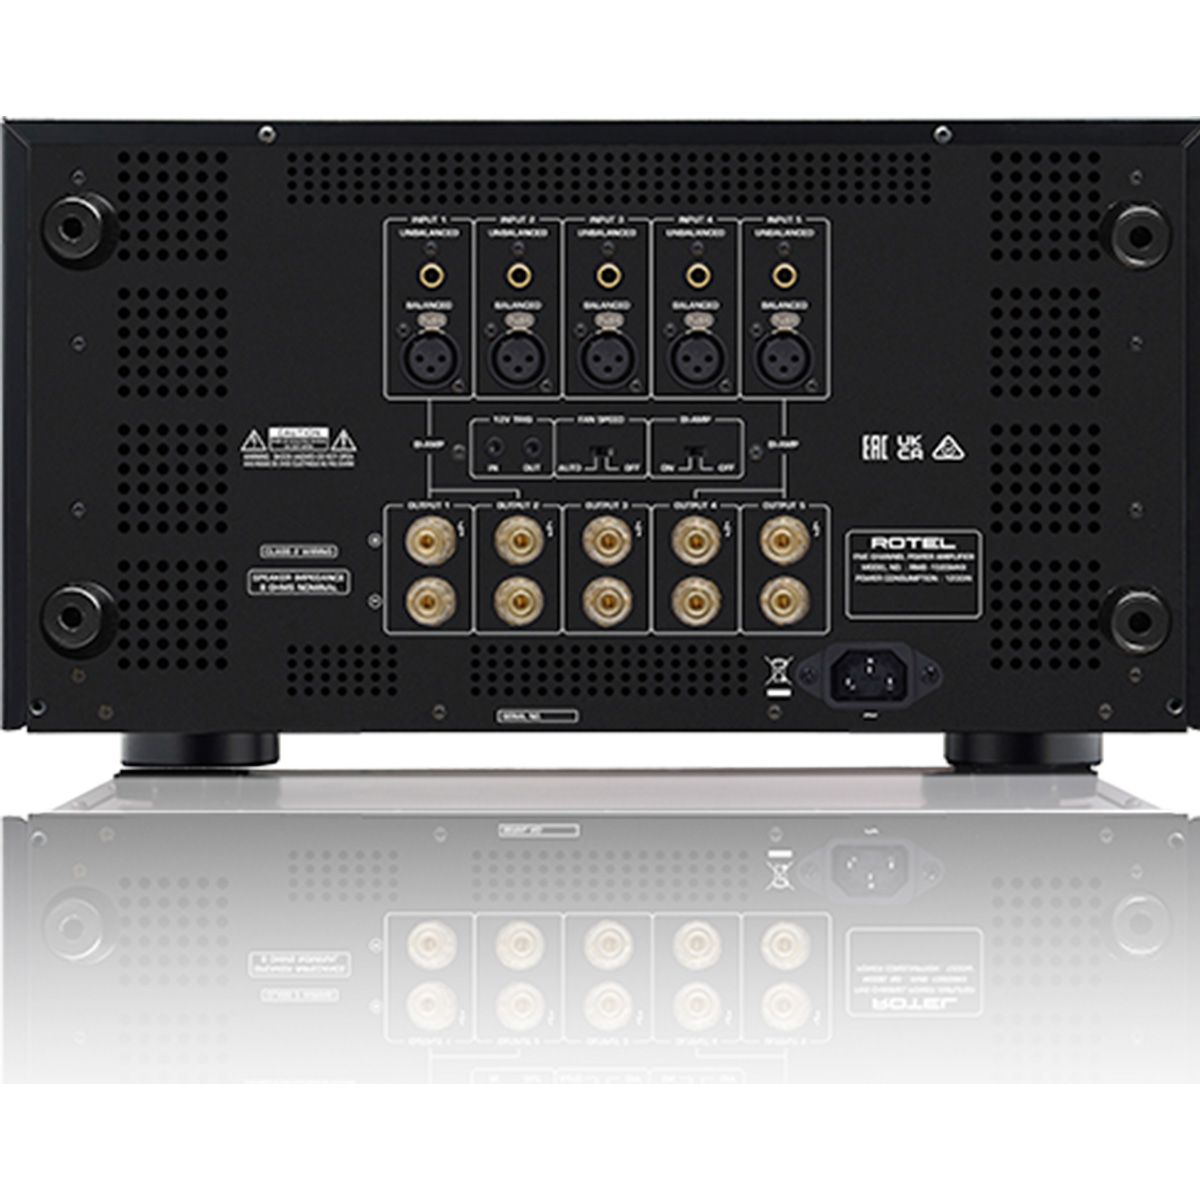 Rotel RMB-1585 5 Channel Home Theater Amplifier